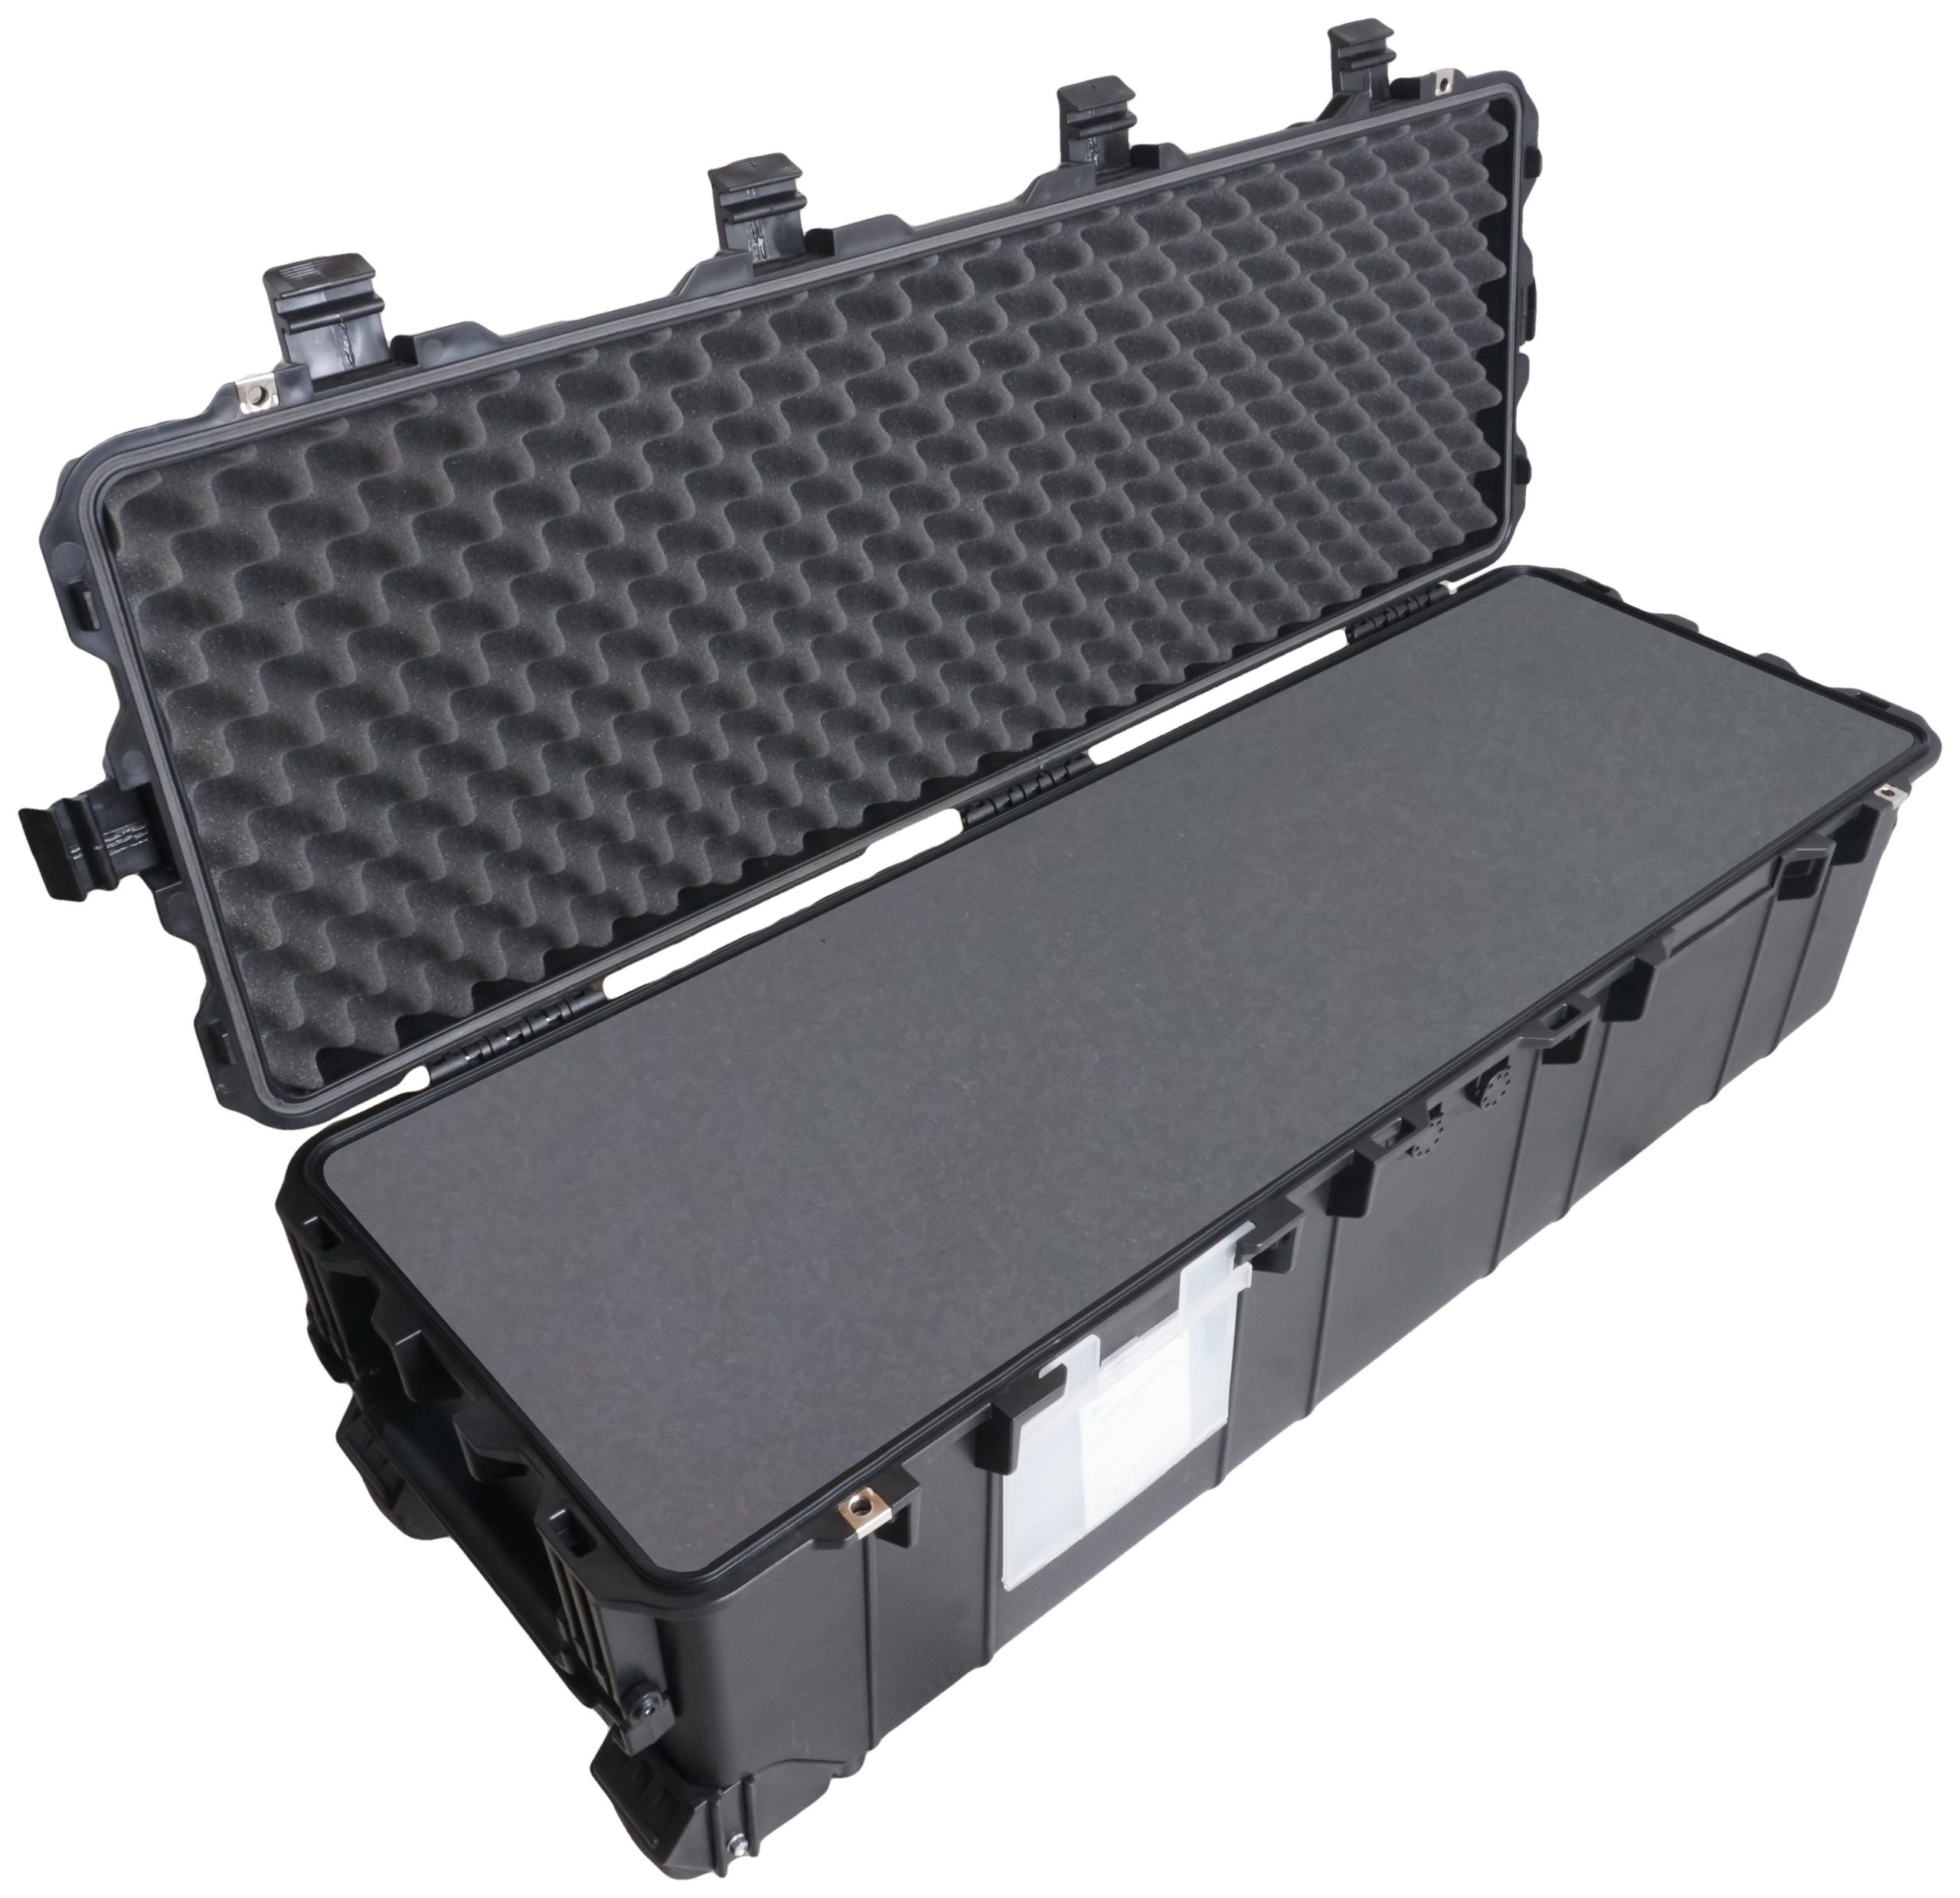 Olhausen Accufast K66 Rail Cushion Rubber - FREE SHIPPING